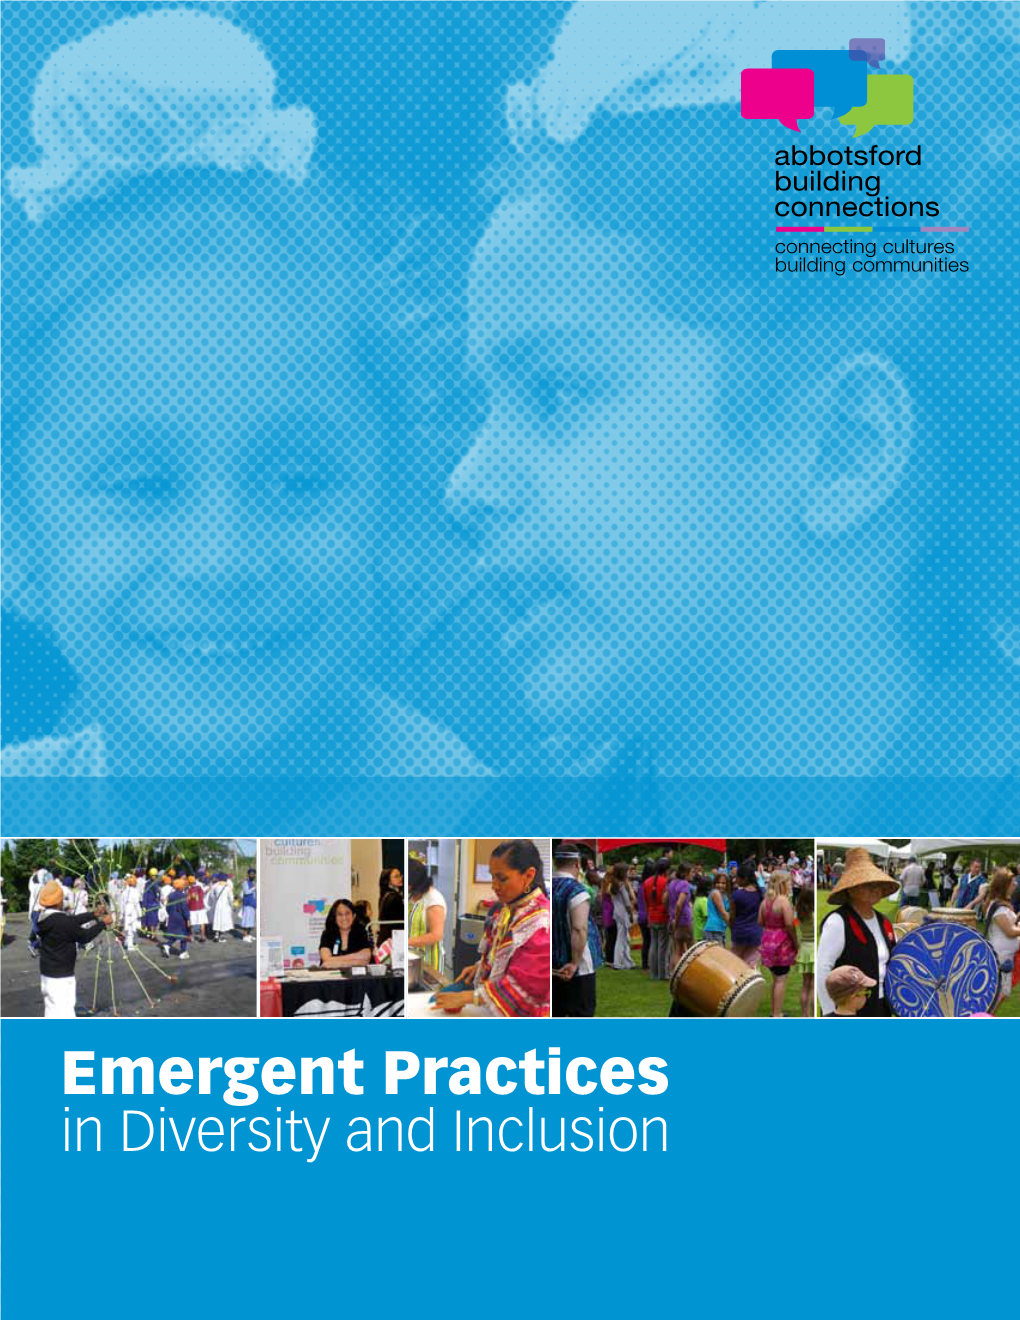 Emergent Practices in Diversity and Inclusion Final Report